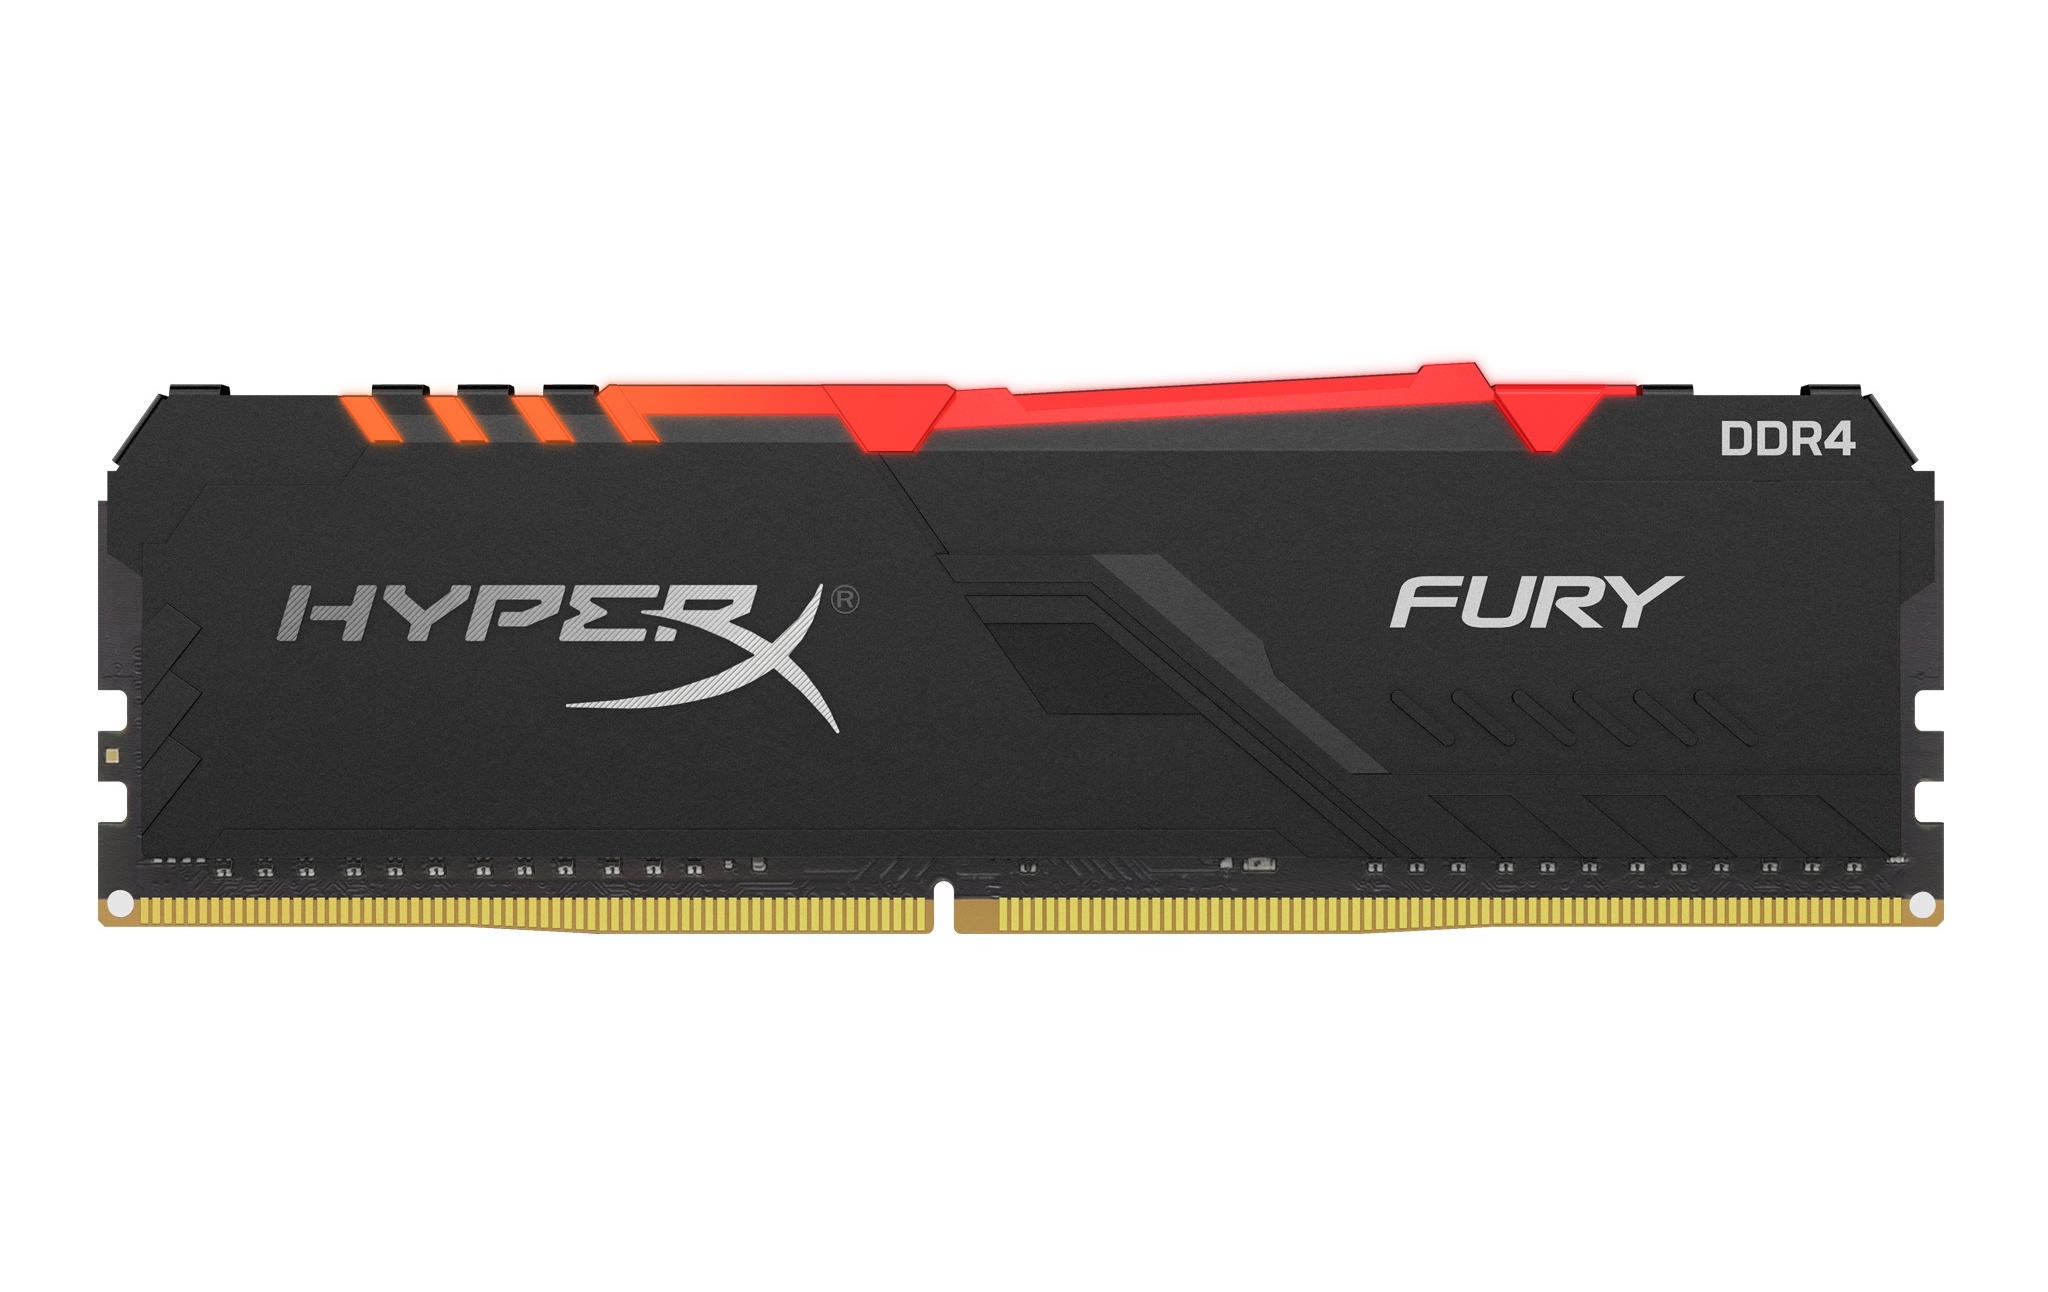 HyperX Fury RGB 3733MHz from the front against a white background